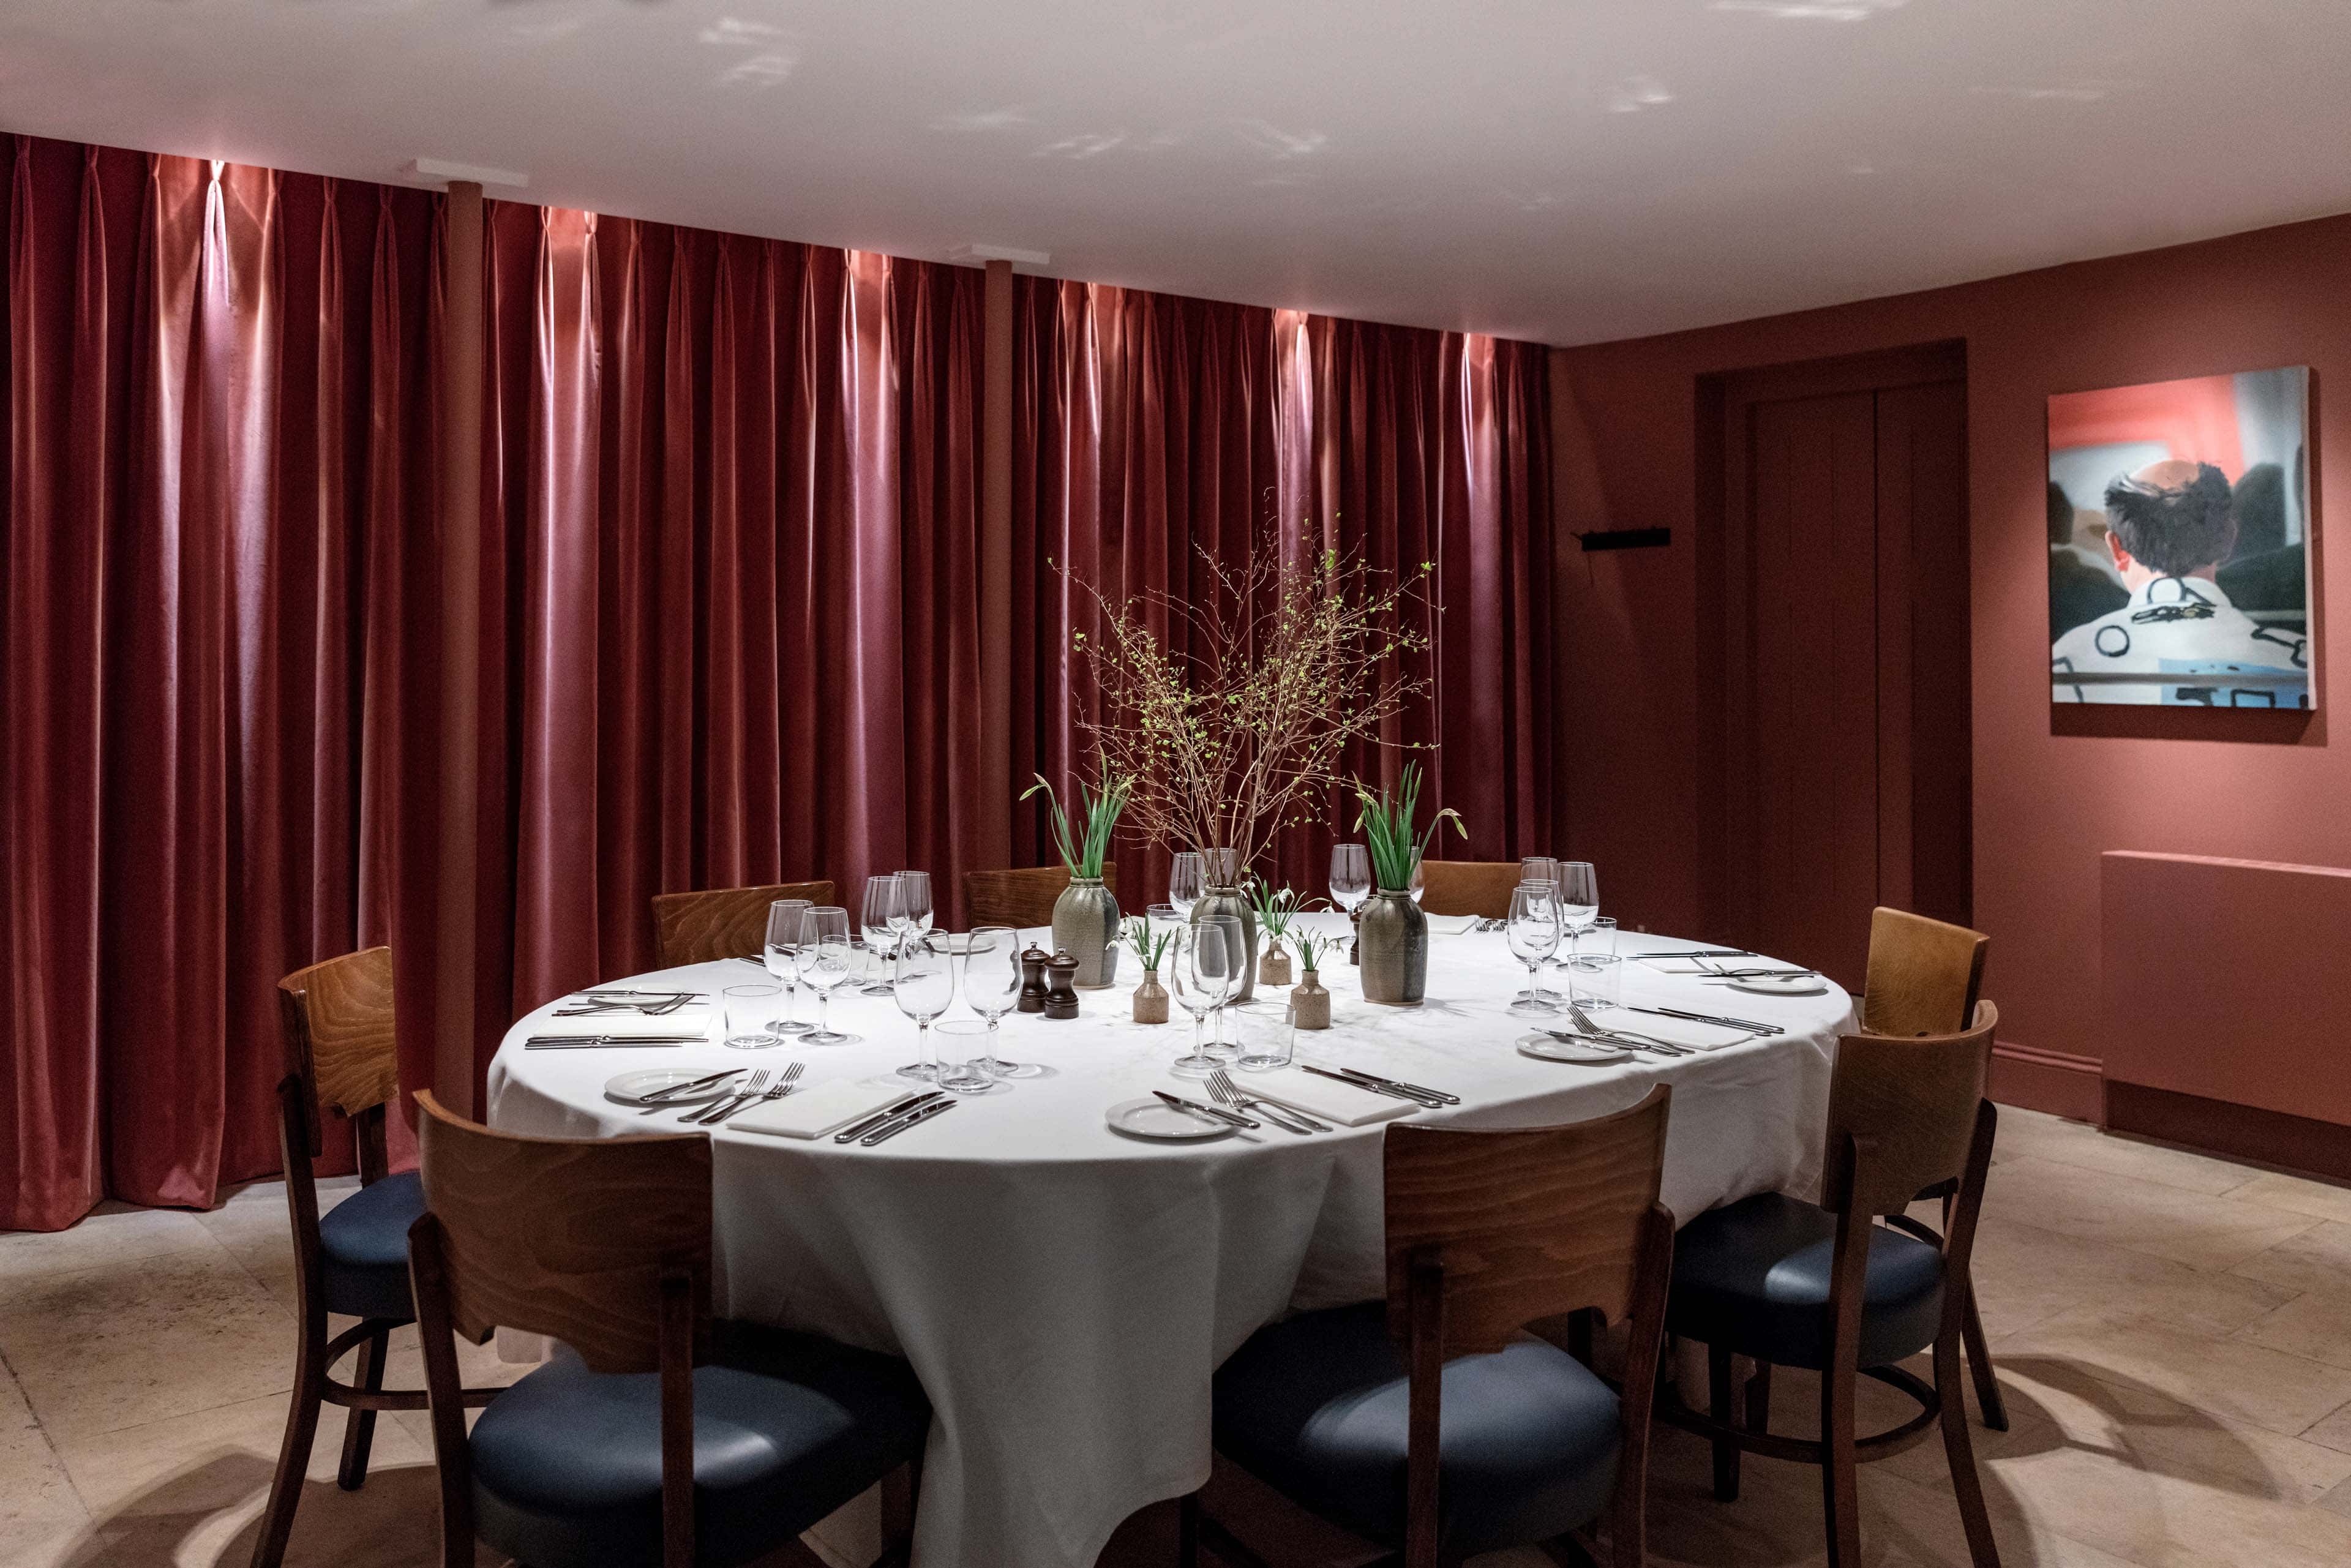 0026 - 2016 - Quod Restaurant & Bar - Oxford - High Res - Red Room Private Dining Flowers - Web Hero